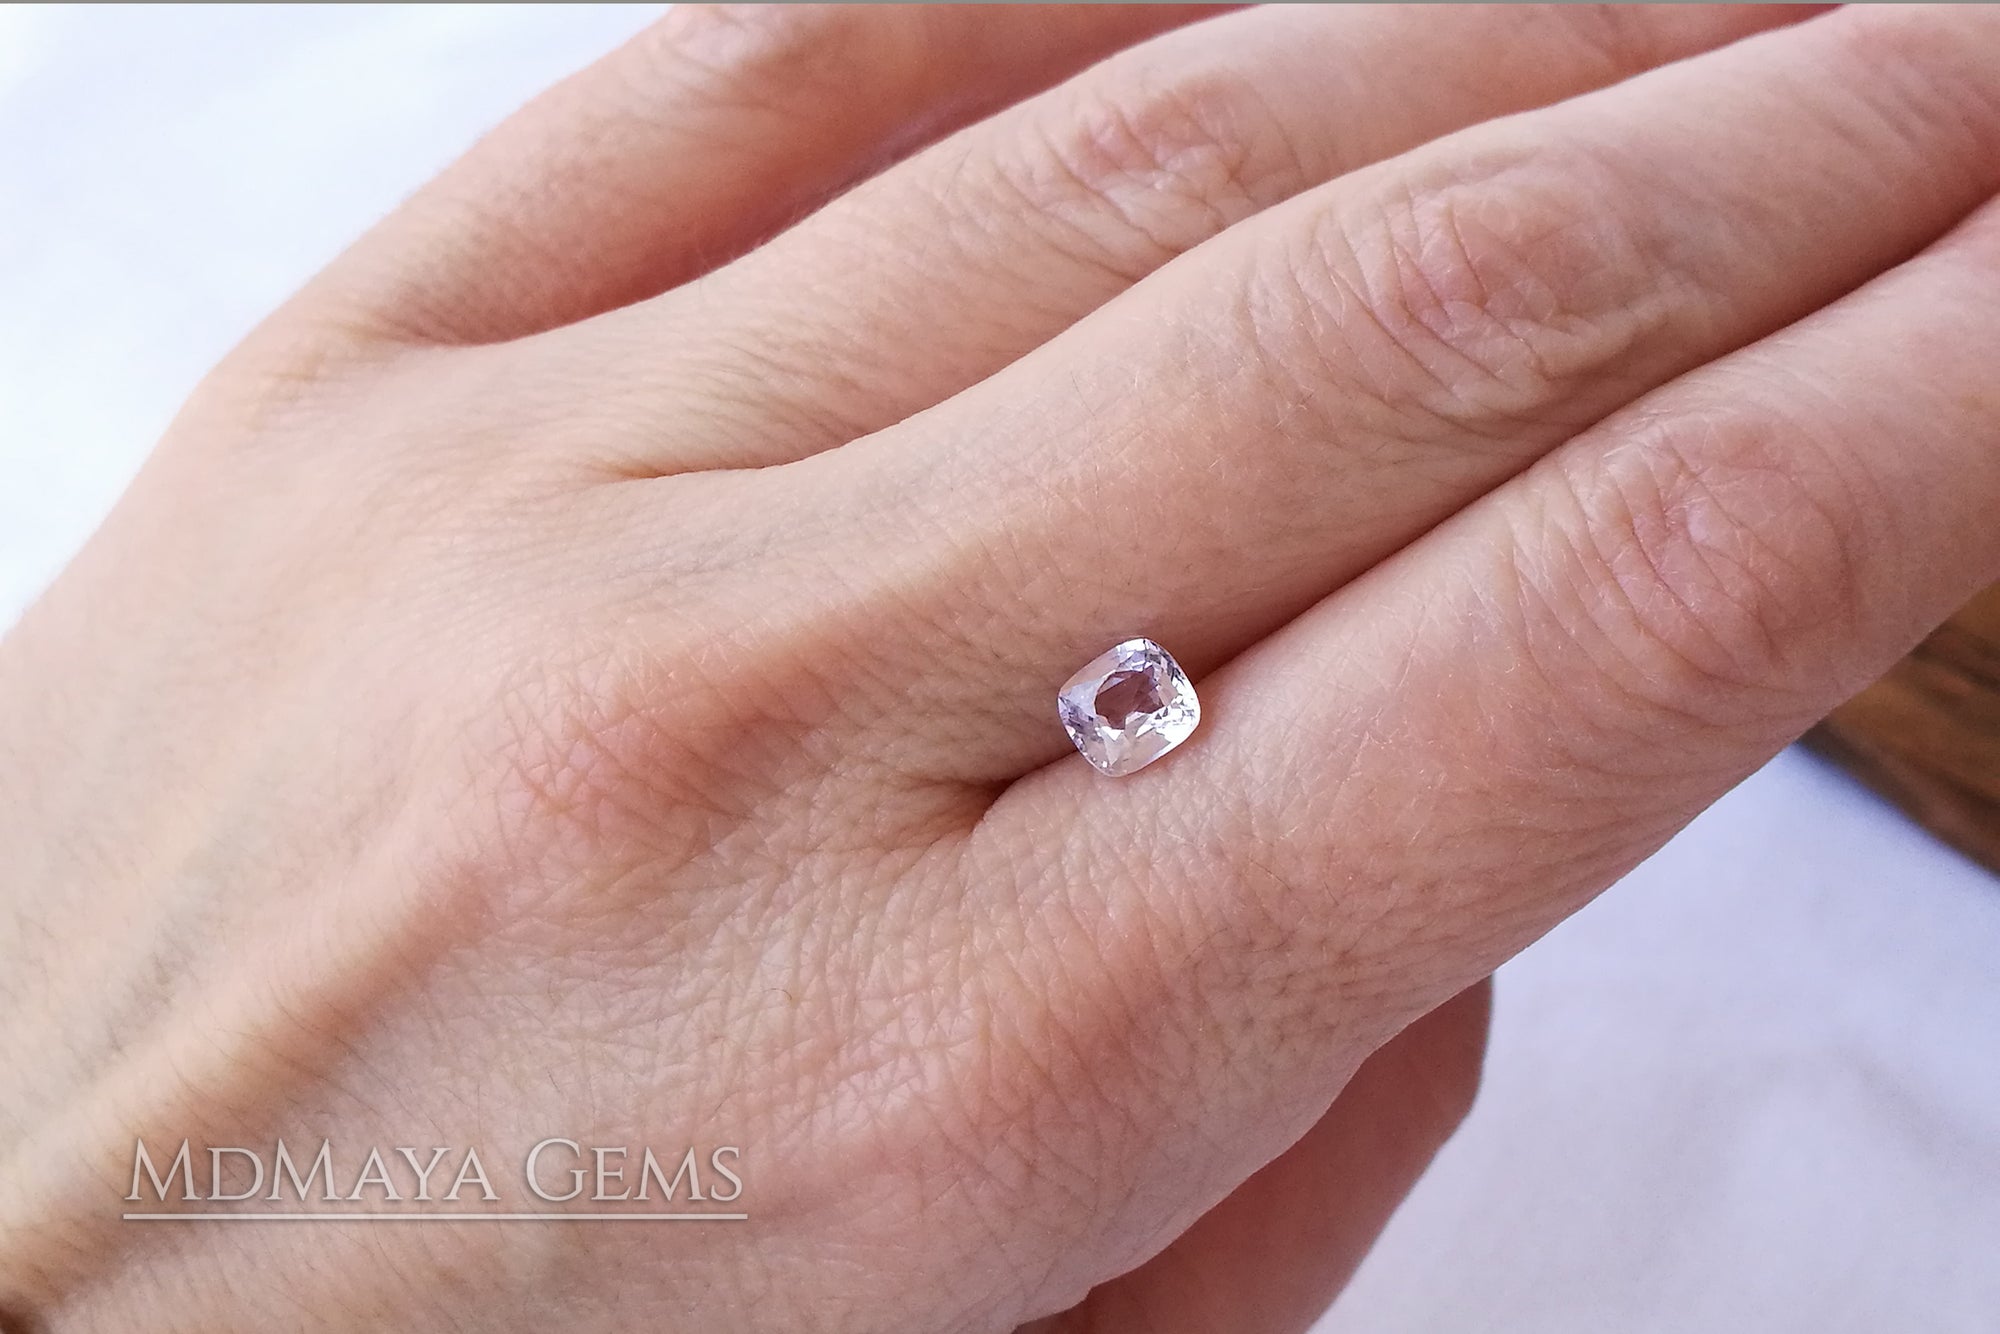 Shimmering White Spinel 0.92 ct Cushion Cut